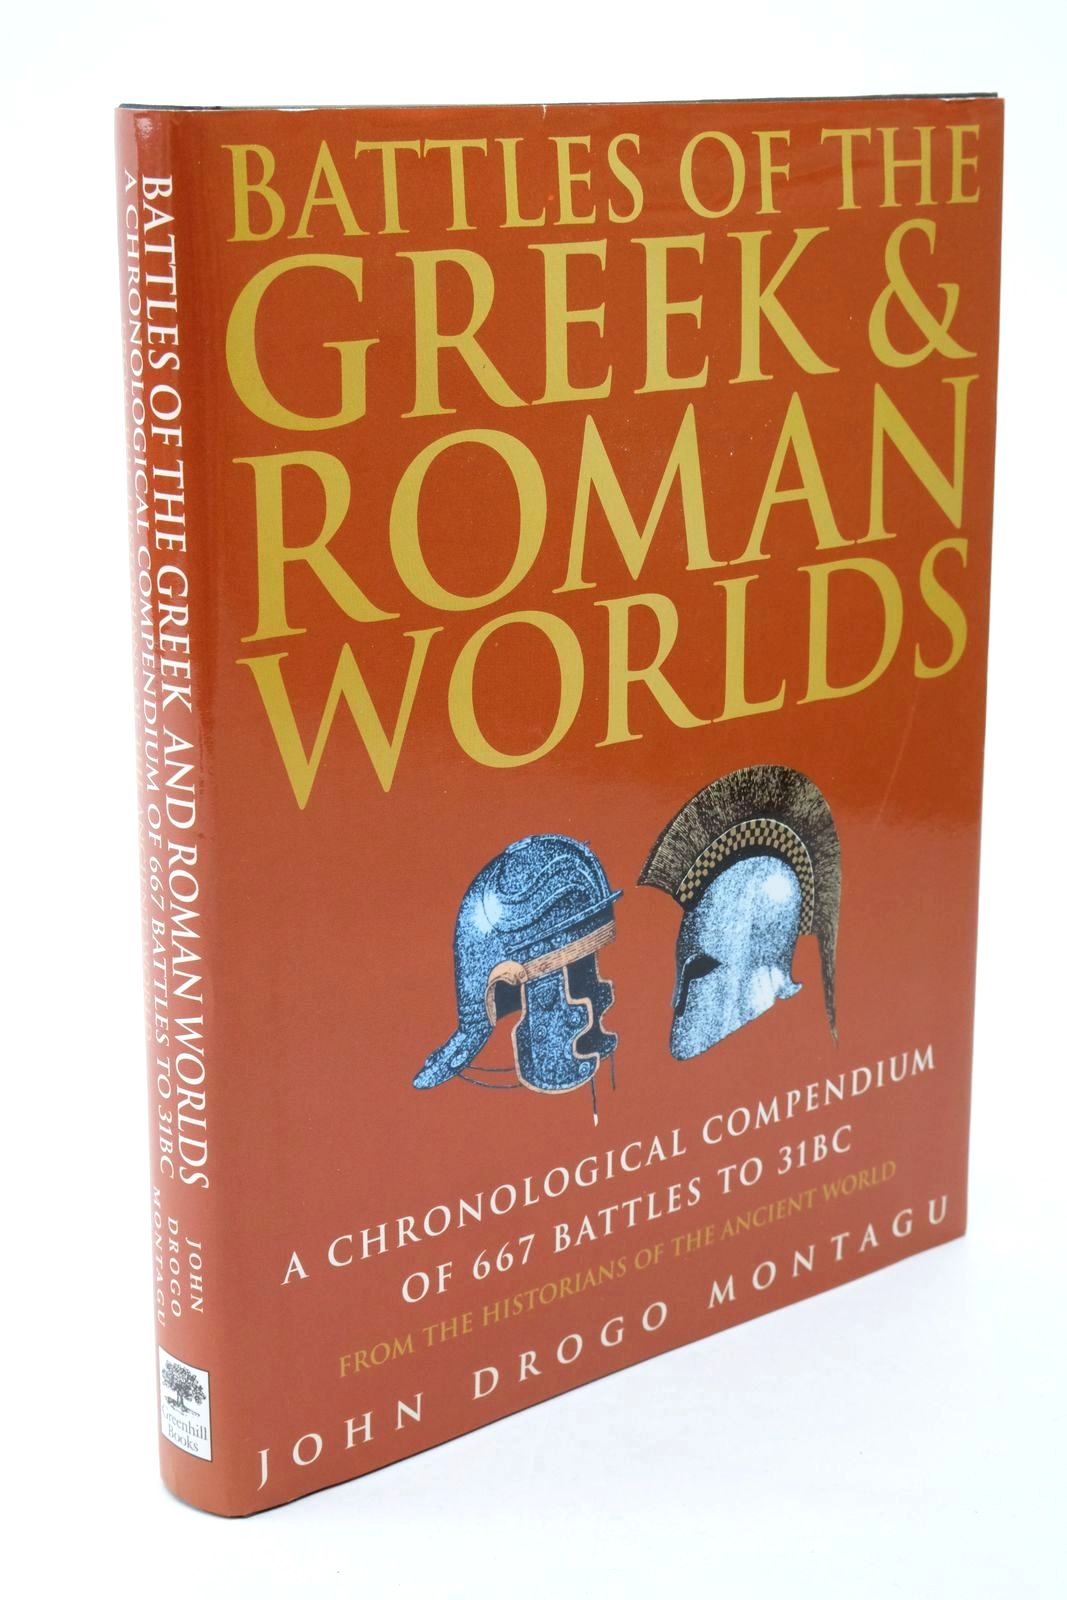 Photo of BATTLES OF THE GREEK AND ROMAN WORLDS written by Montagu, John Drogo published by Greenhill Books (STOCK CODE: 1322595)  for sale by Stella & Rose's Books